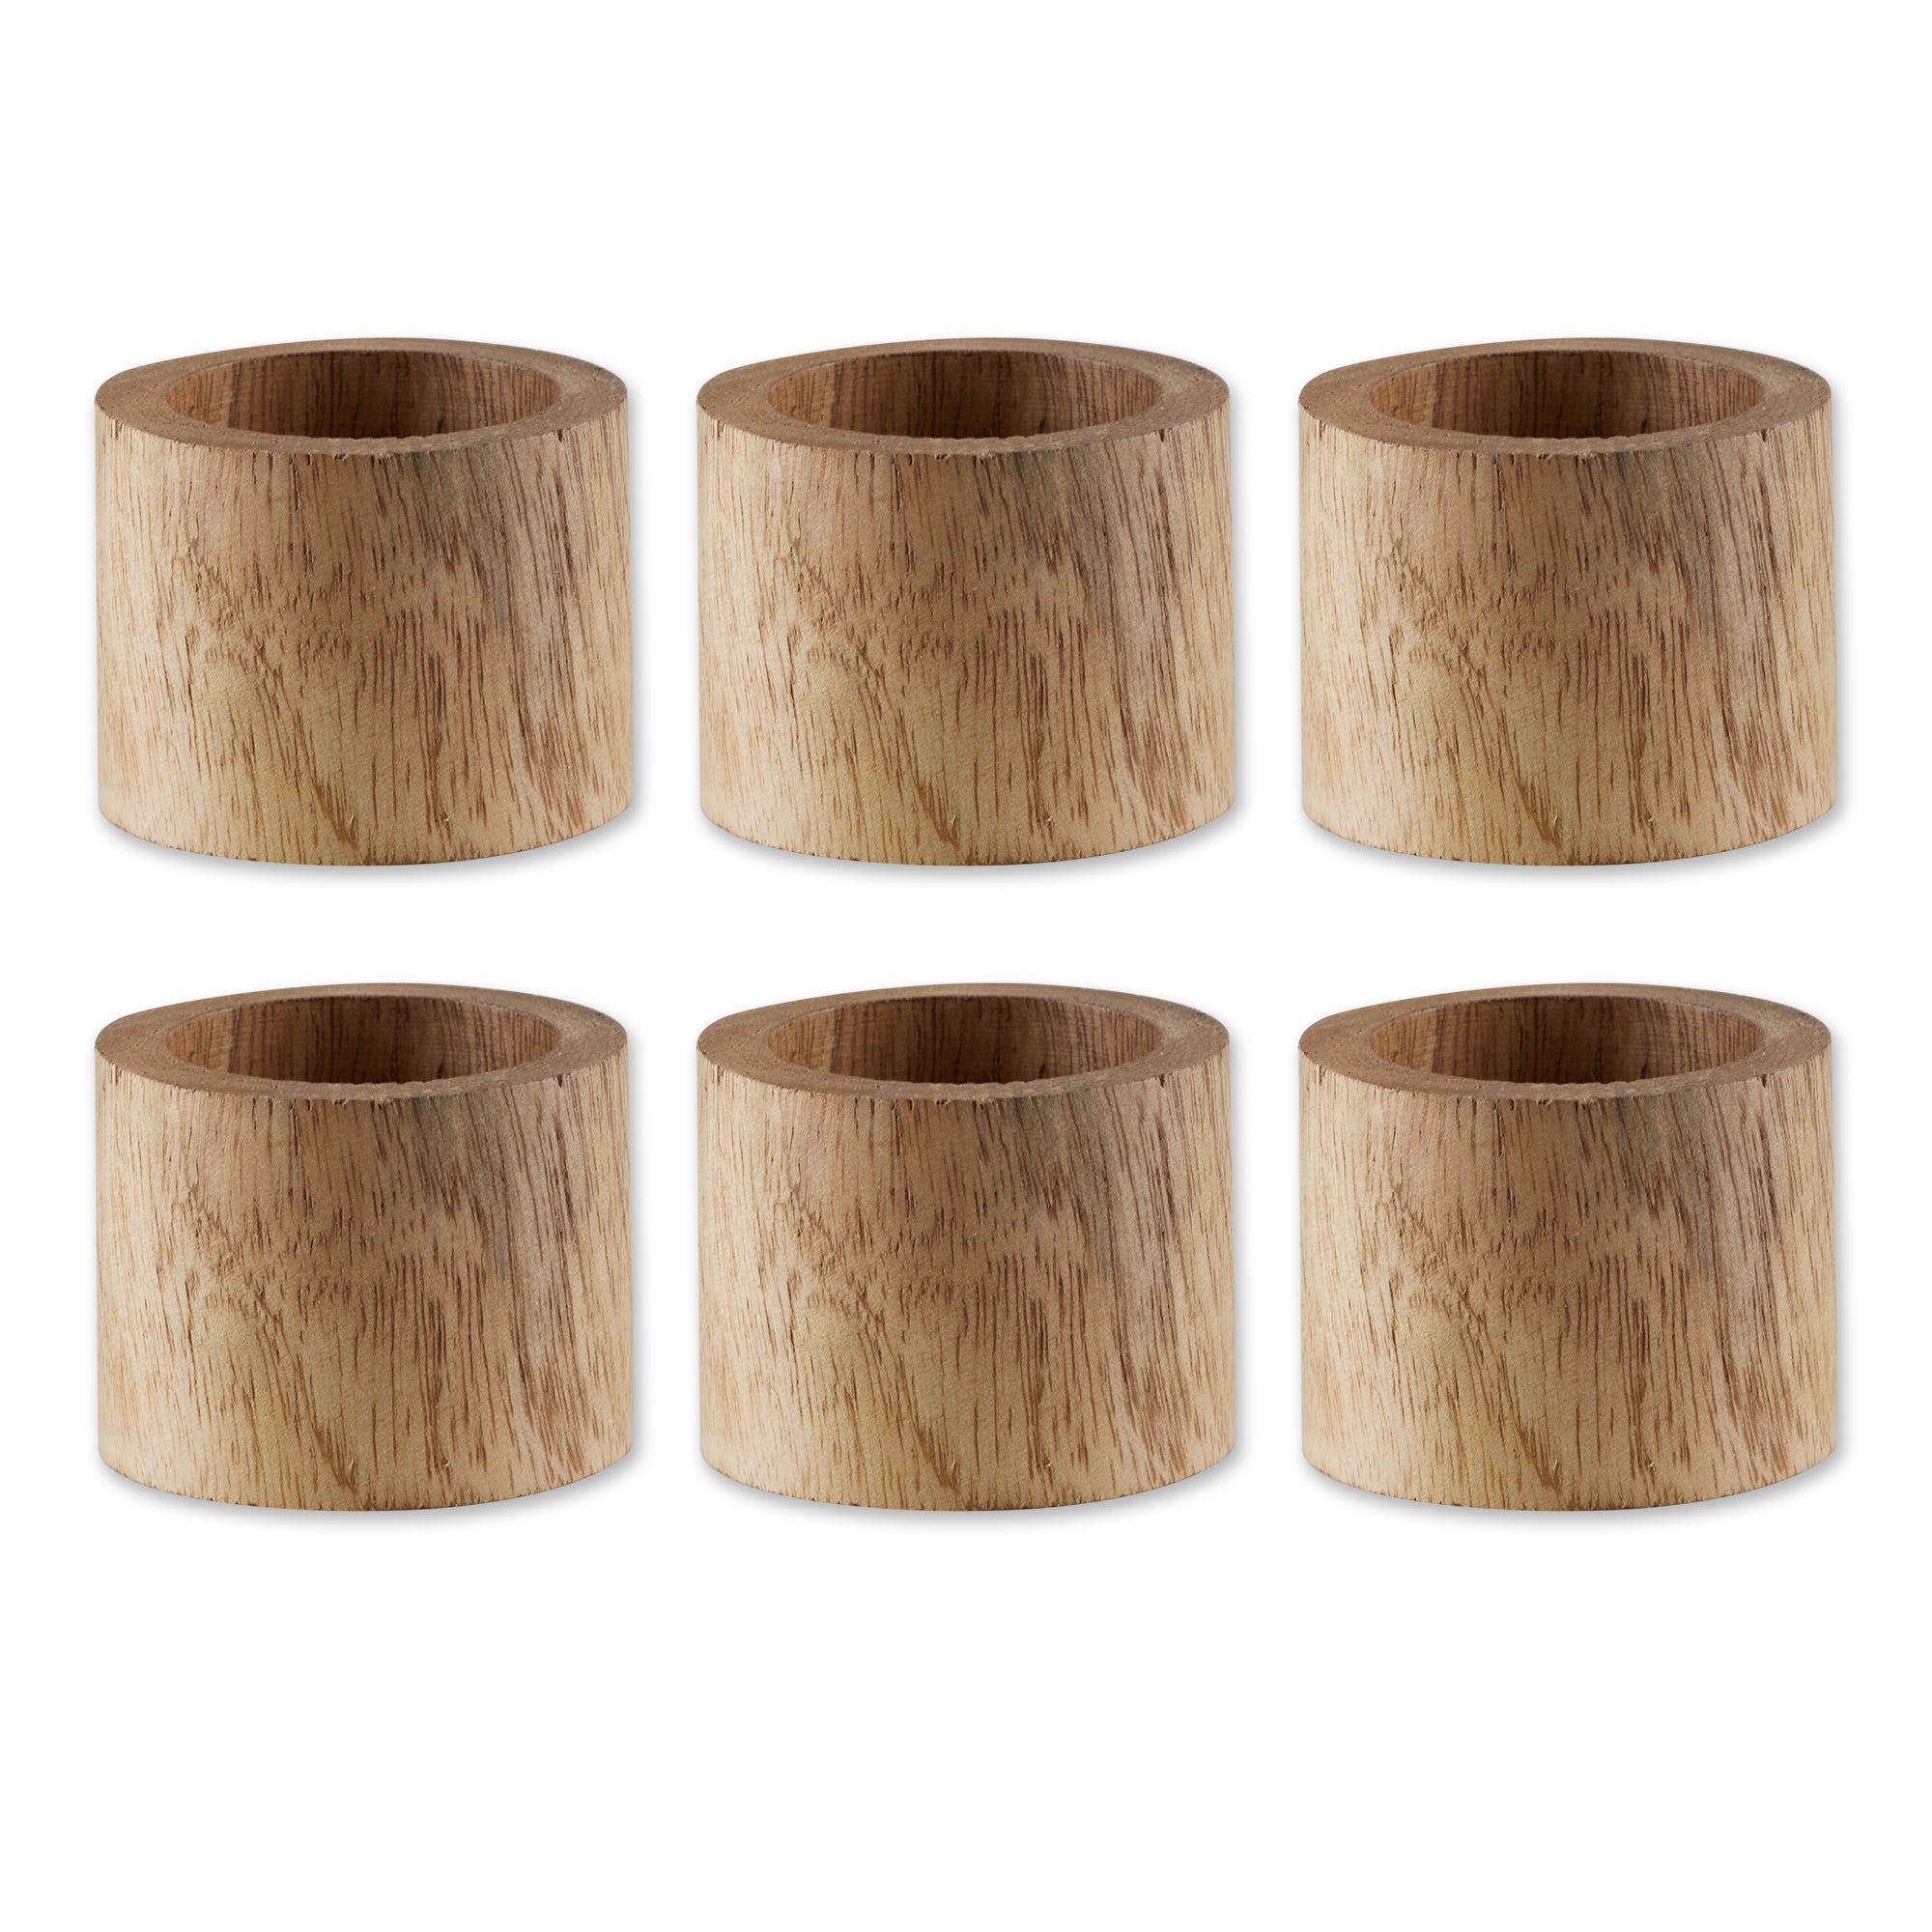 Light Finish Wood Band Napkin Ring set of 6 – DII Home Store